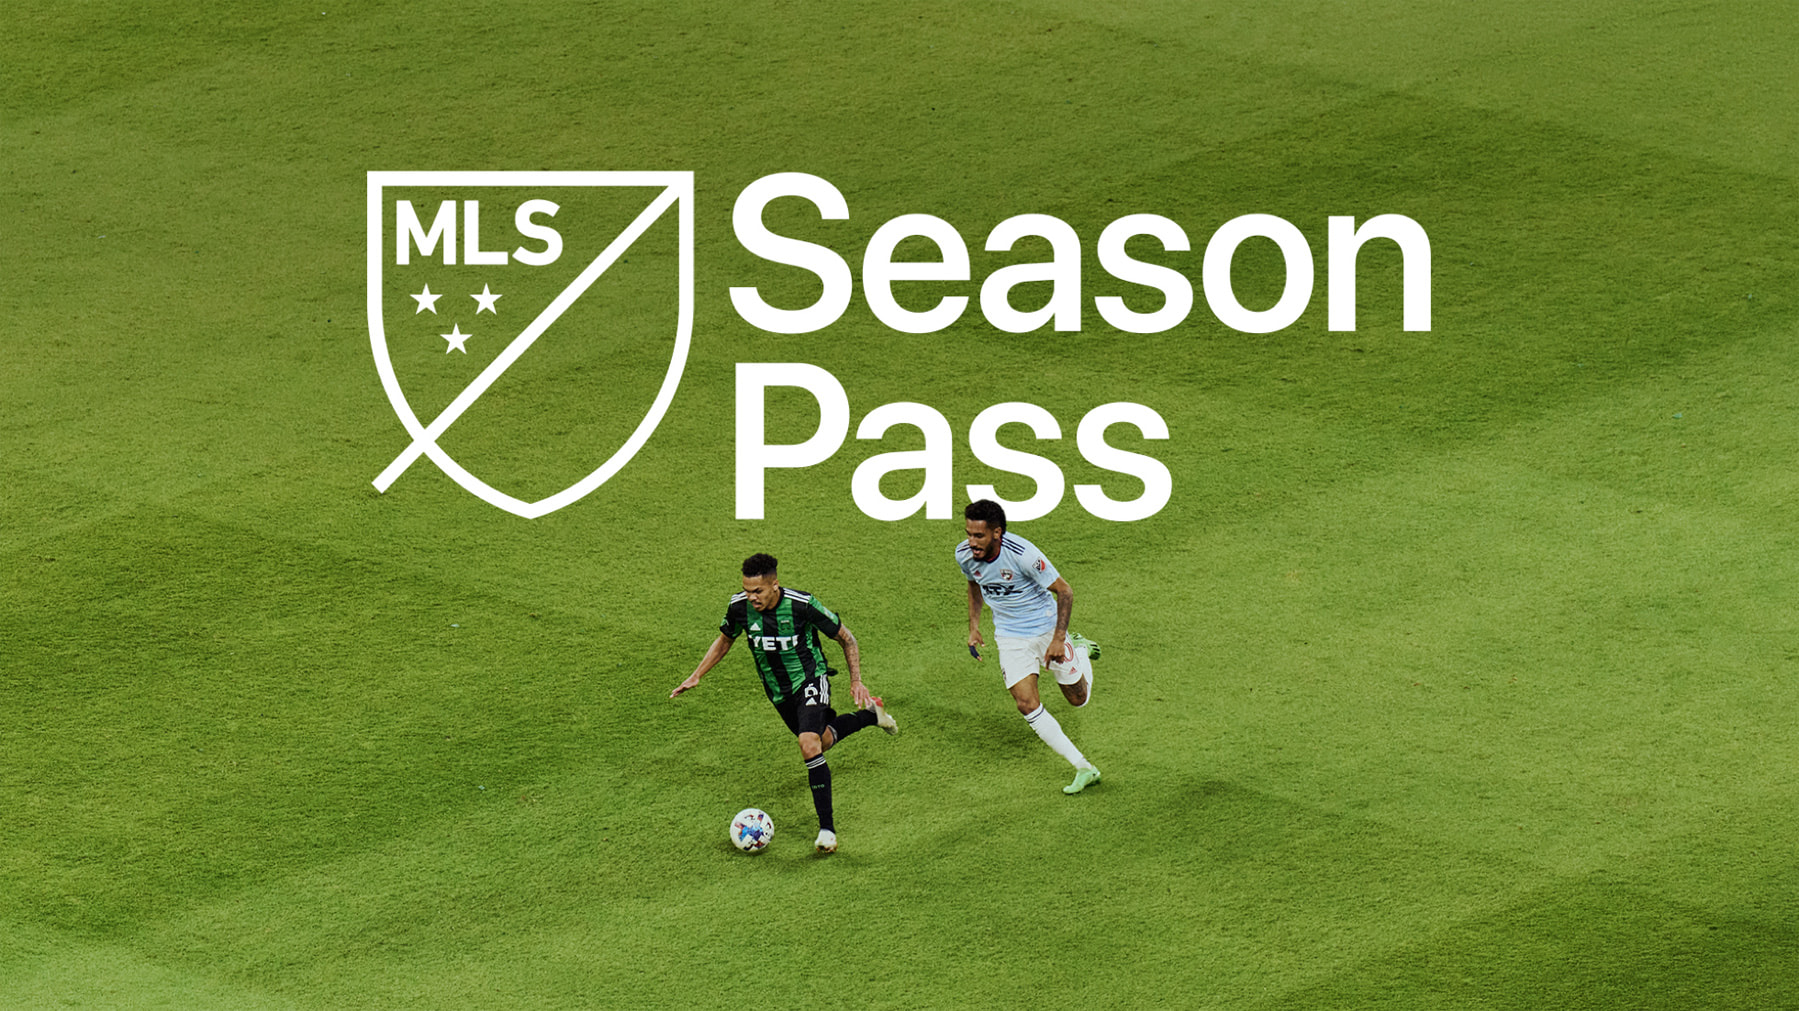 How to watch Apple TV+, MLS Season Pass, and more - Apple Support